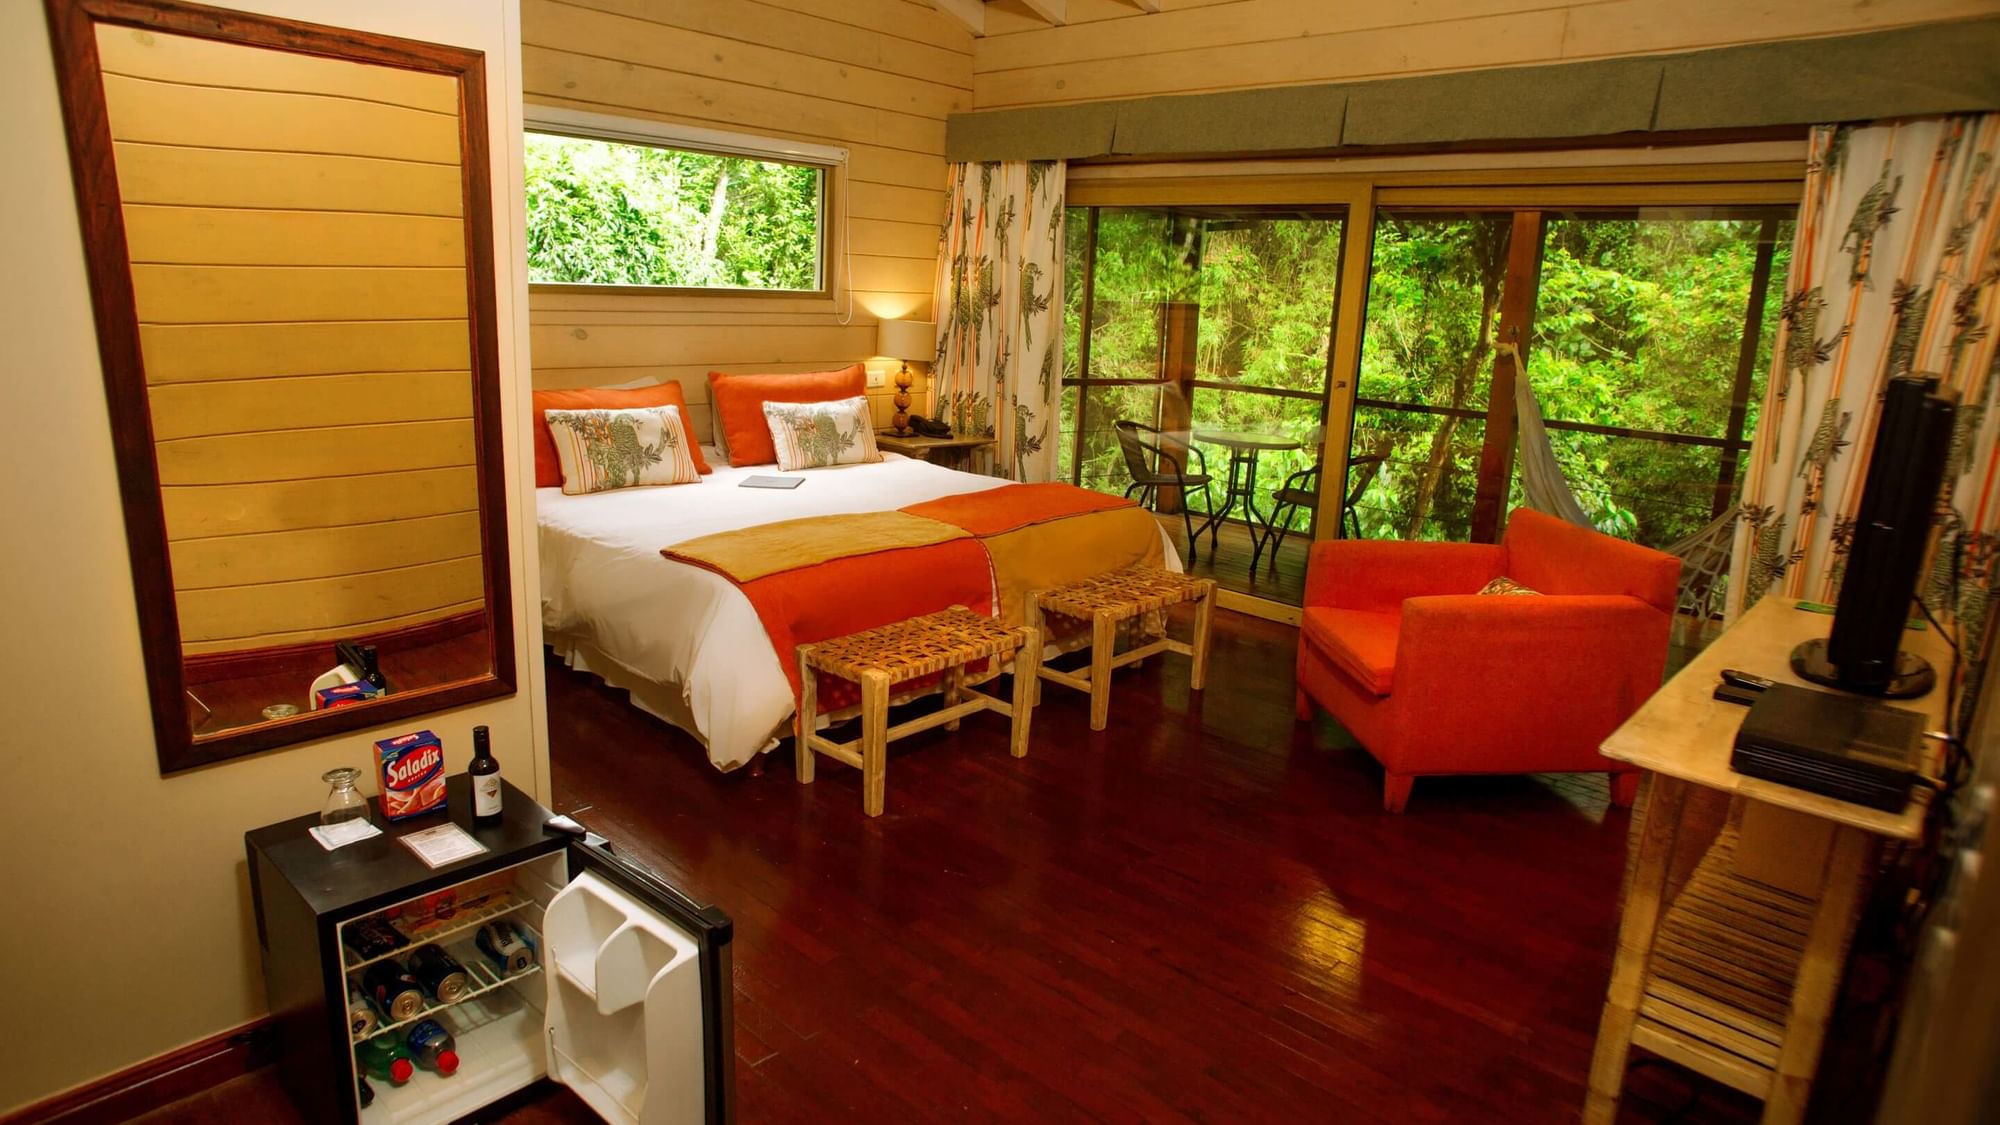 Bedroom & balcony lounge area in Jungle Room at DOT Hotels